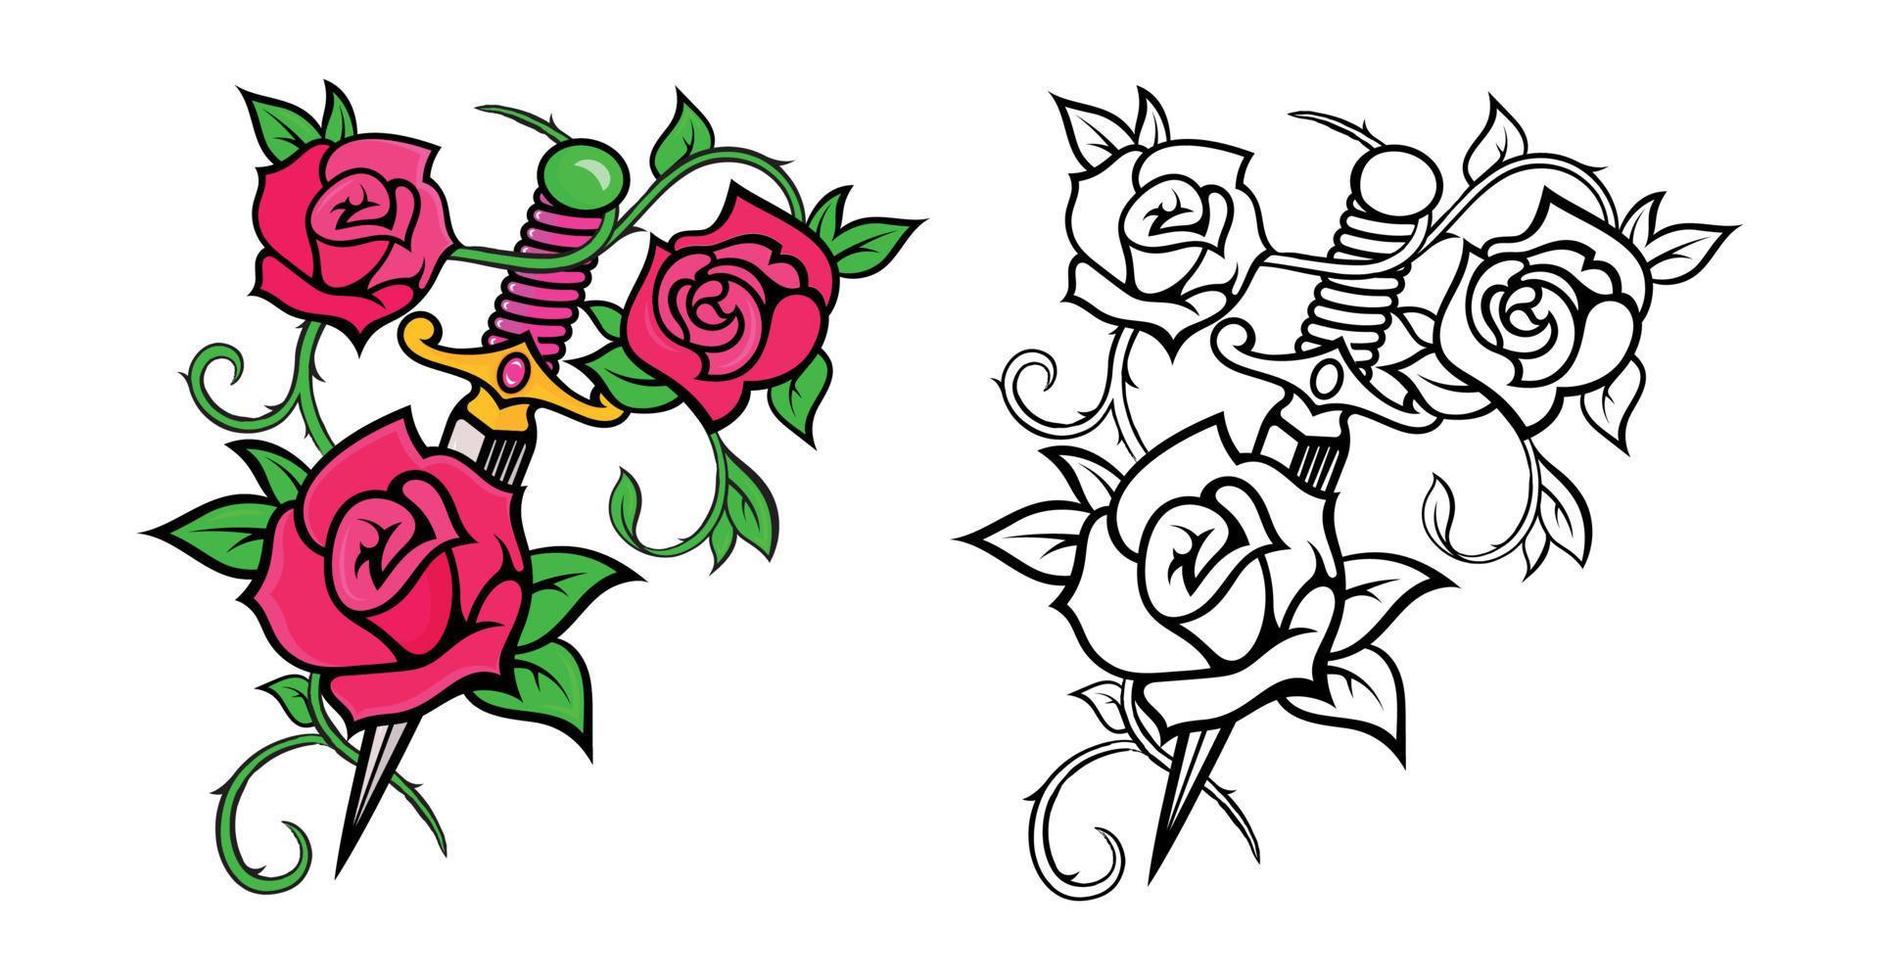 Illustrations of Swords with Flowers vector